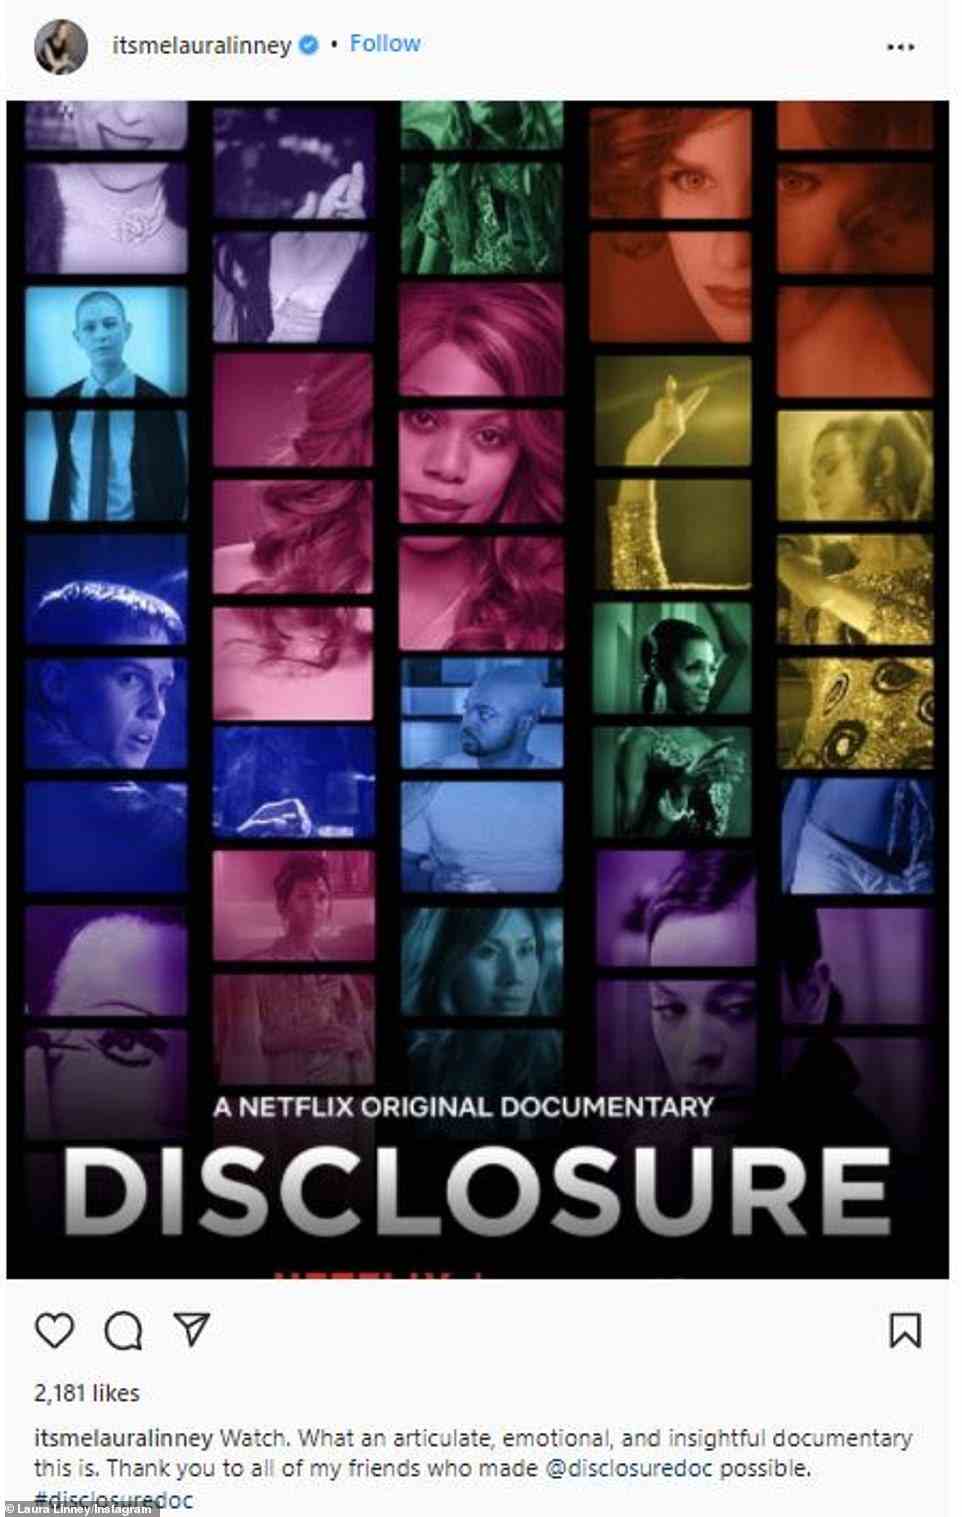 'What an articulate, emotional, and insightful documentary!' The 58-year-old native New Yorker has never worked with the Alabama-born 49-year-old, but she did post in 2020 about how much she enjoyed the Netflix documentary Disclosure that Laverne produced